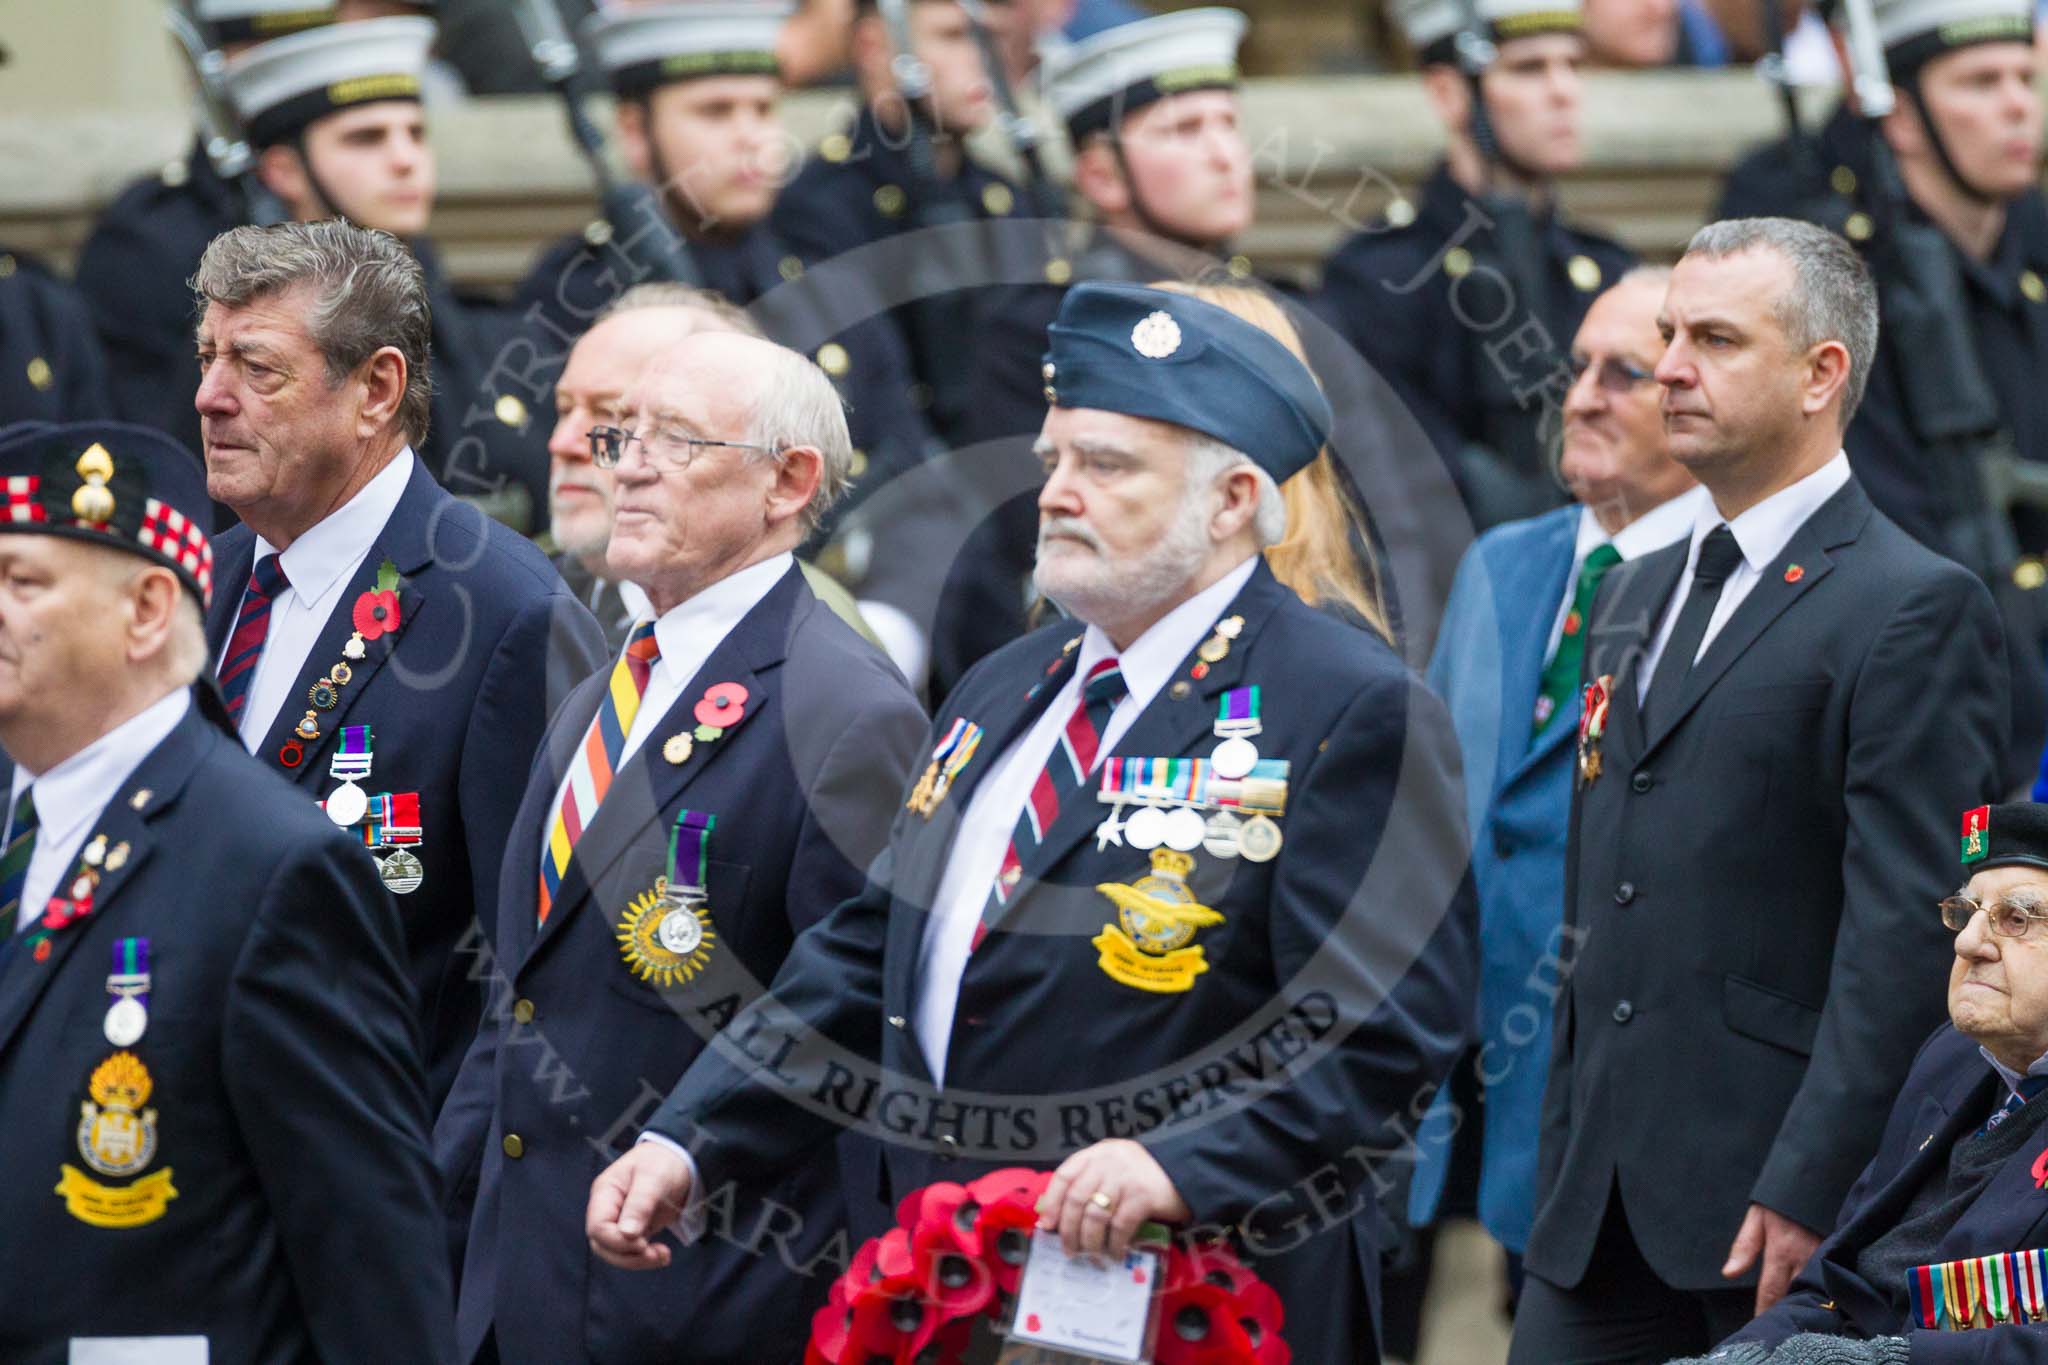 Remembrance Sunday at the Cenotaph 2015: Group F20, Aden Veterans Association.
Cenotaph, Whitehall, London SW1,
London,
Greater London,
United Kingdom,
on 08 November 2015 at 12:06, image #1113